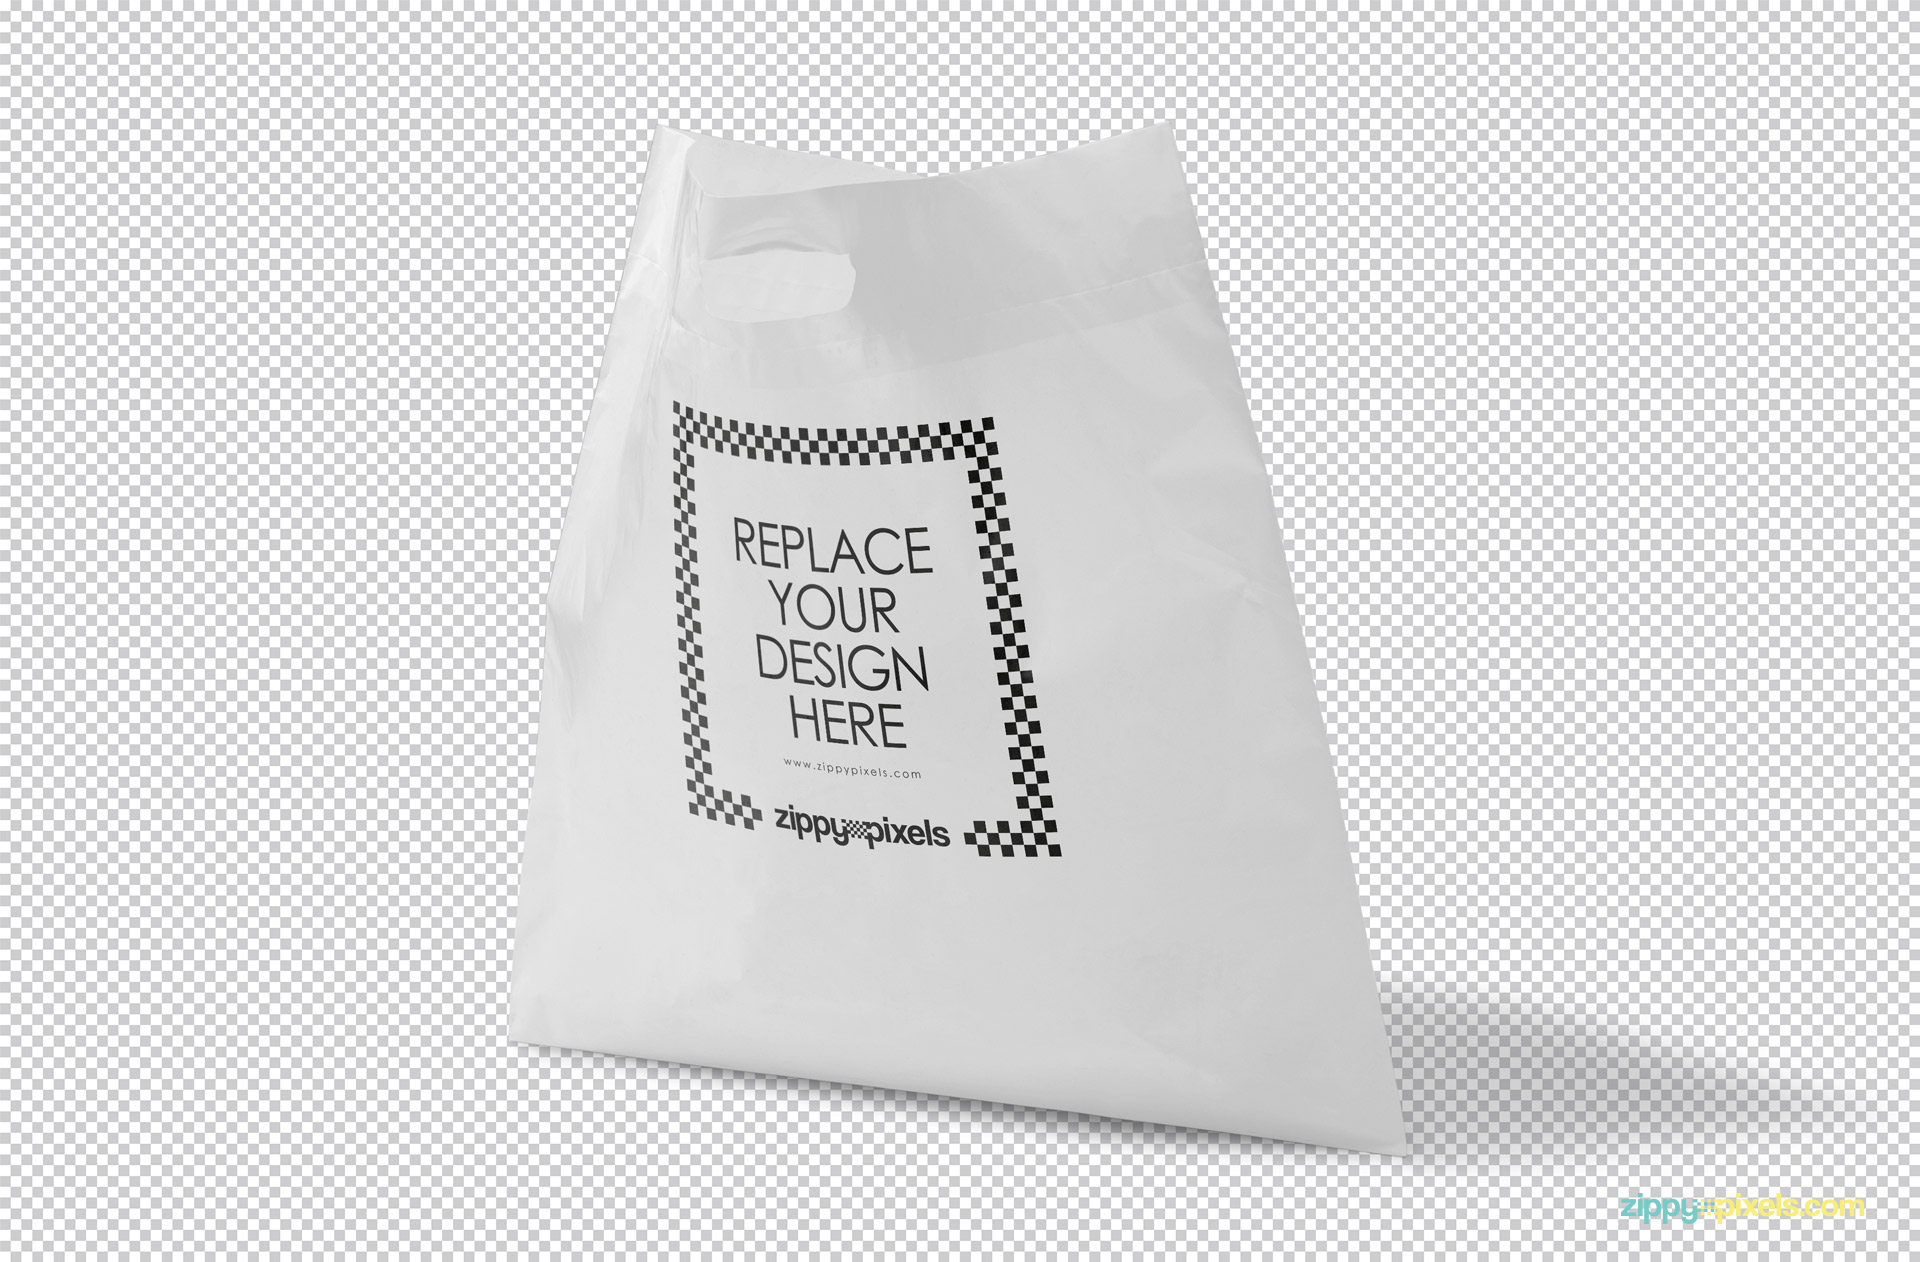 Use Photoshop to replace the design of this bag mockup.